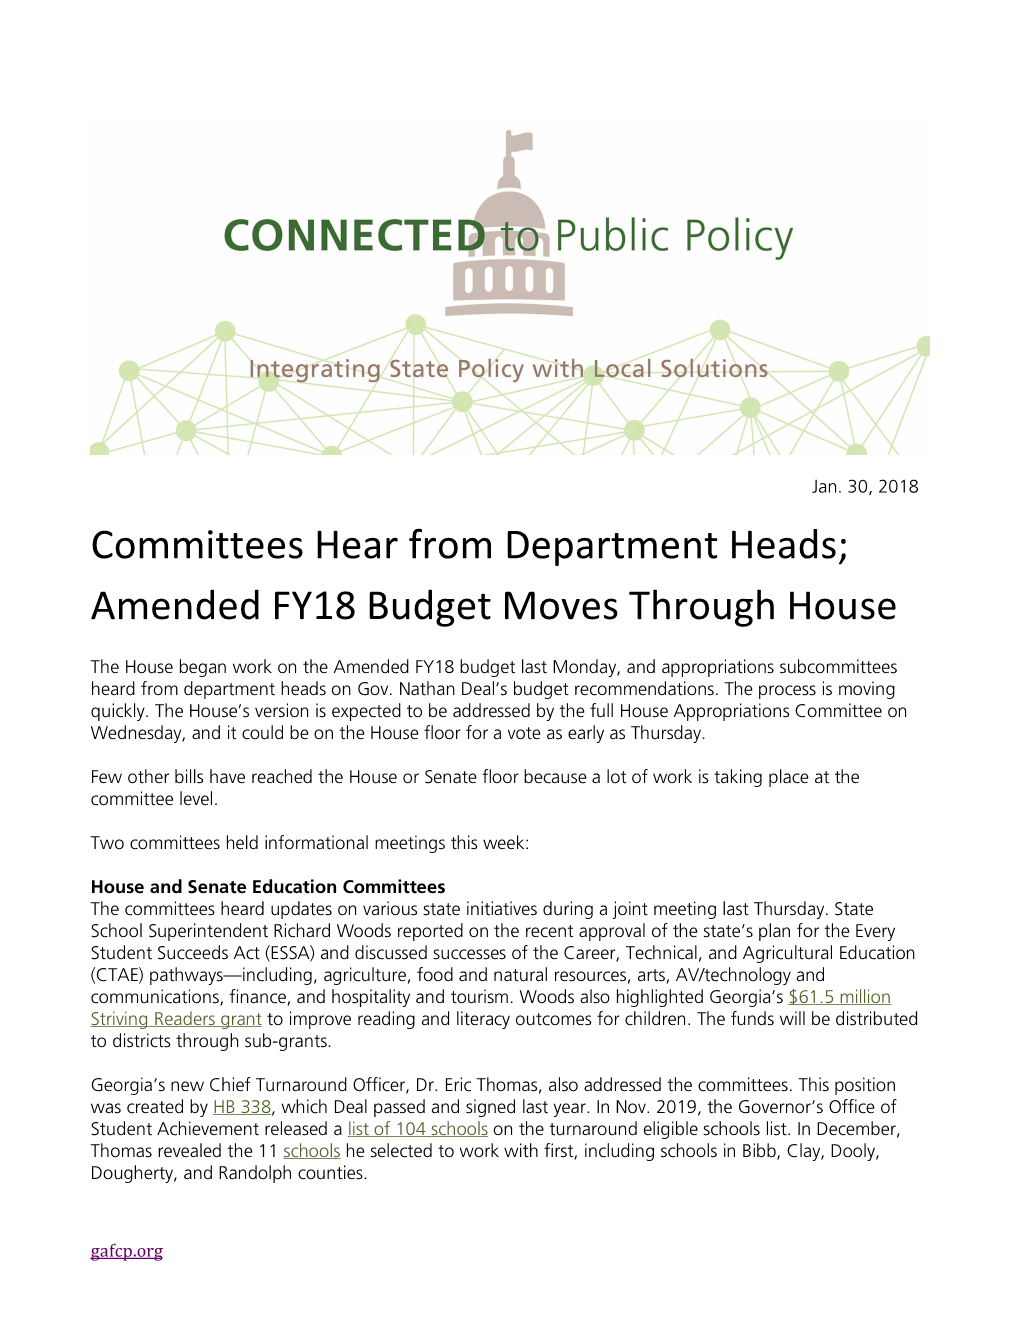 Committees Hear from Department Heads; Amended FY18 Budget Moves Through House